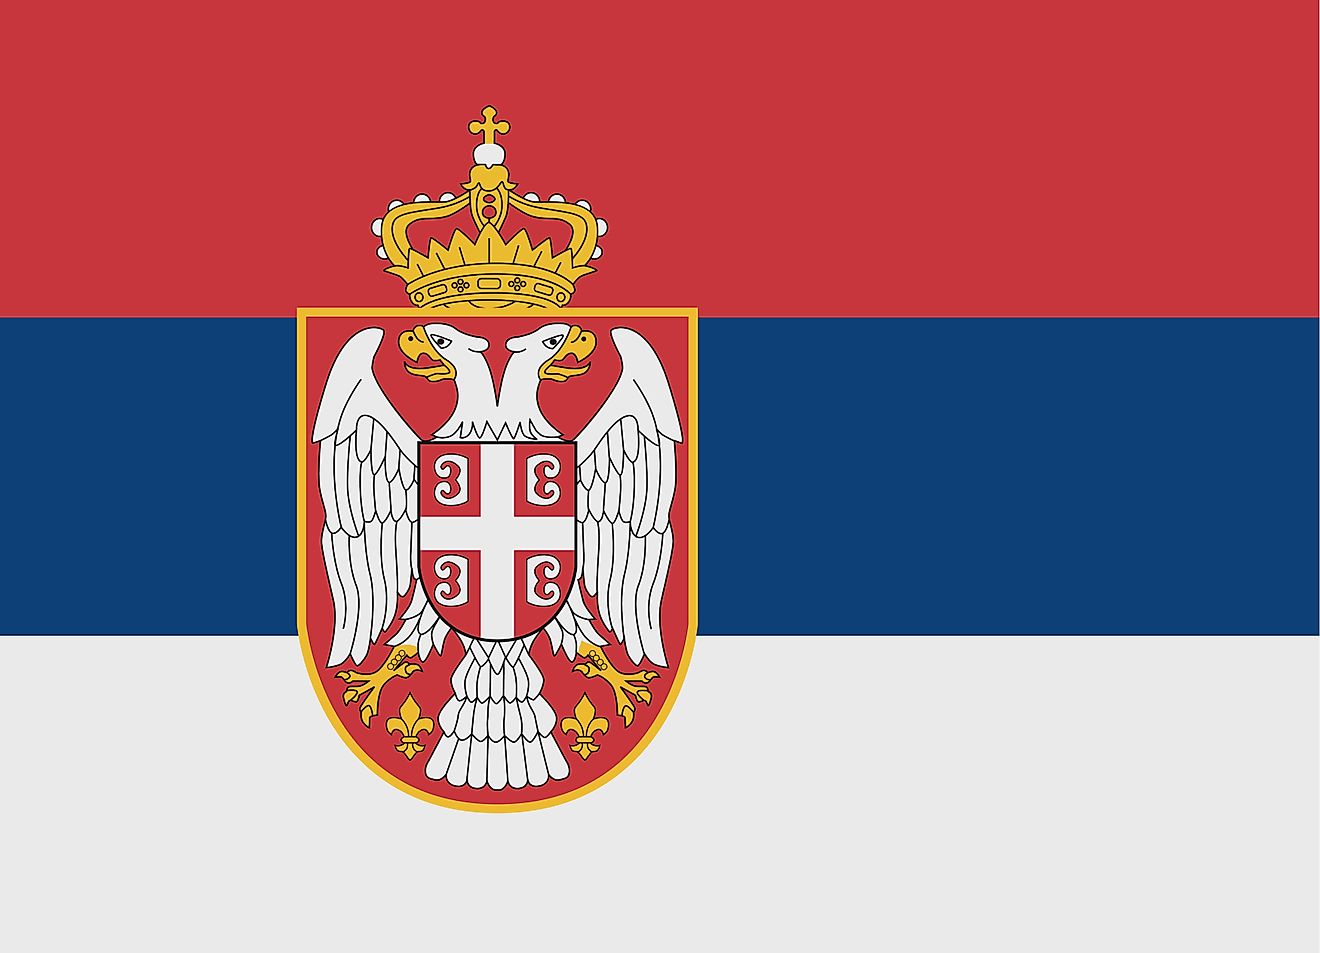 The National Anthem of Serbia features three equal horizontal stripes of the traditional Pan-Slavic colors - red (top), blue, and white; with the coat of arms placed towards the flag's hoist side